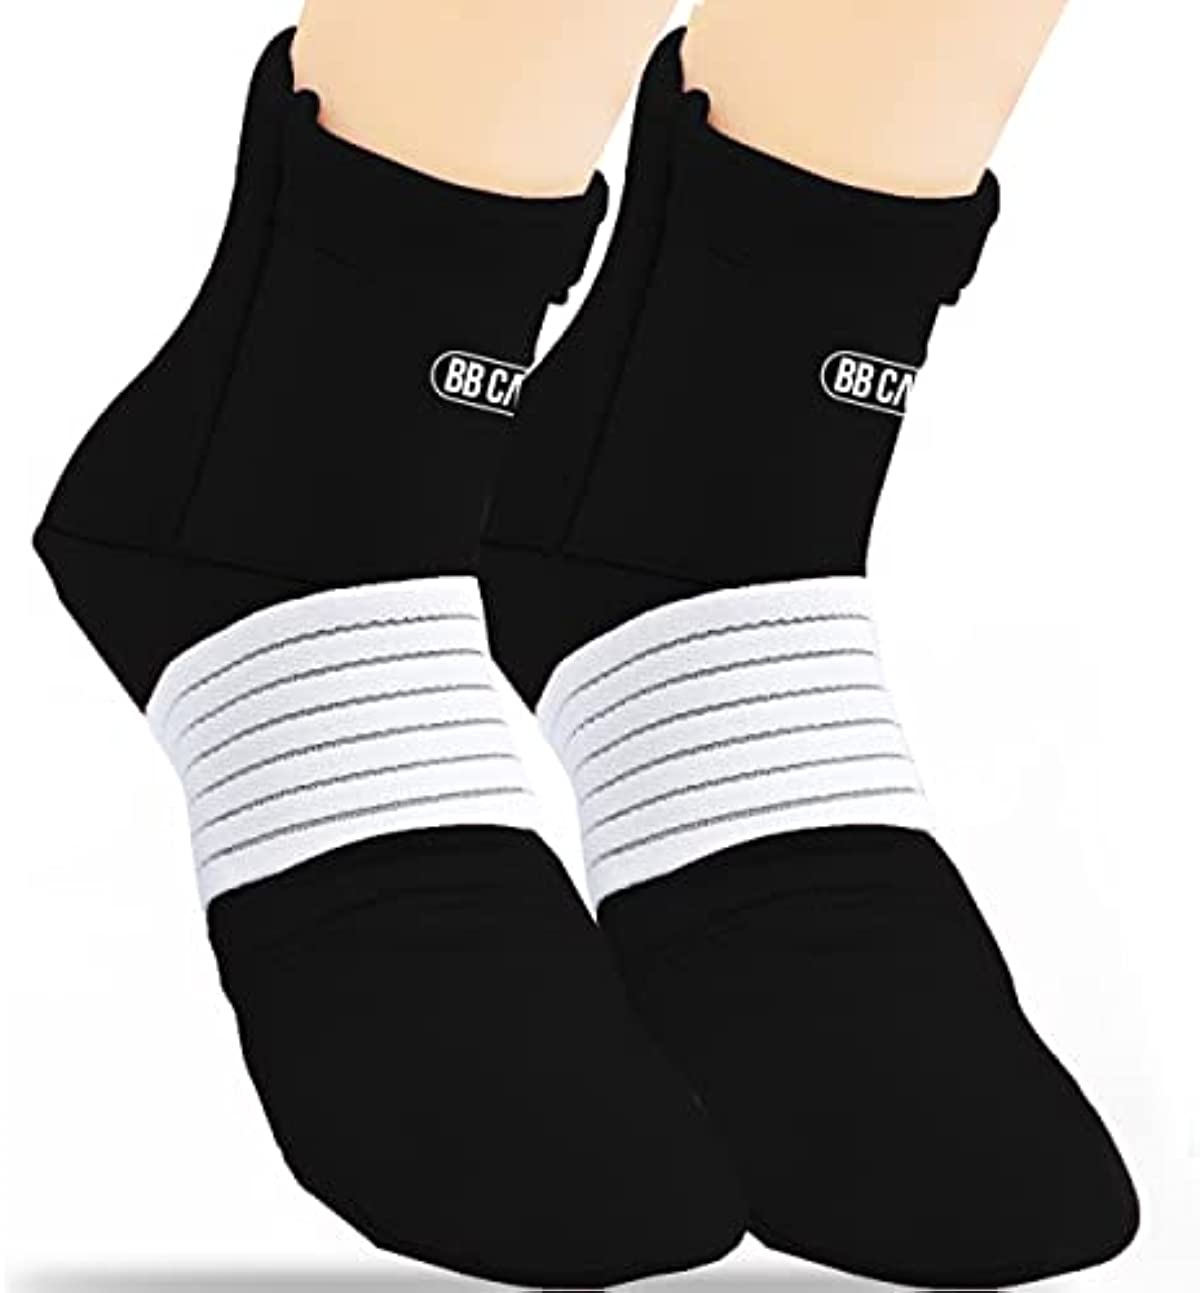 [Premium] Cold Therapy Socks, Foot Ice Pack, w/Compression Straps, Swollen Feet, Arthritis, Ice Packs for Foot Neuropathy Relief, Plantar Fasciitis, Chemotherapy Care (Black, Large, 11 inch)